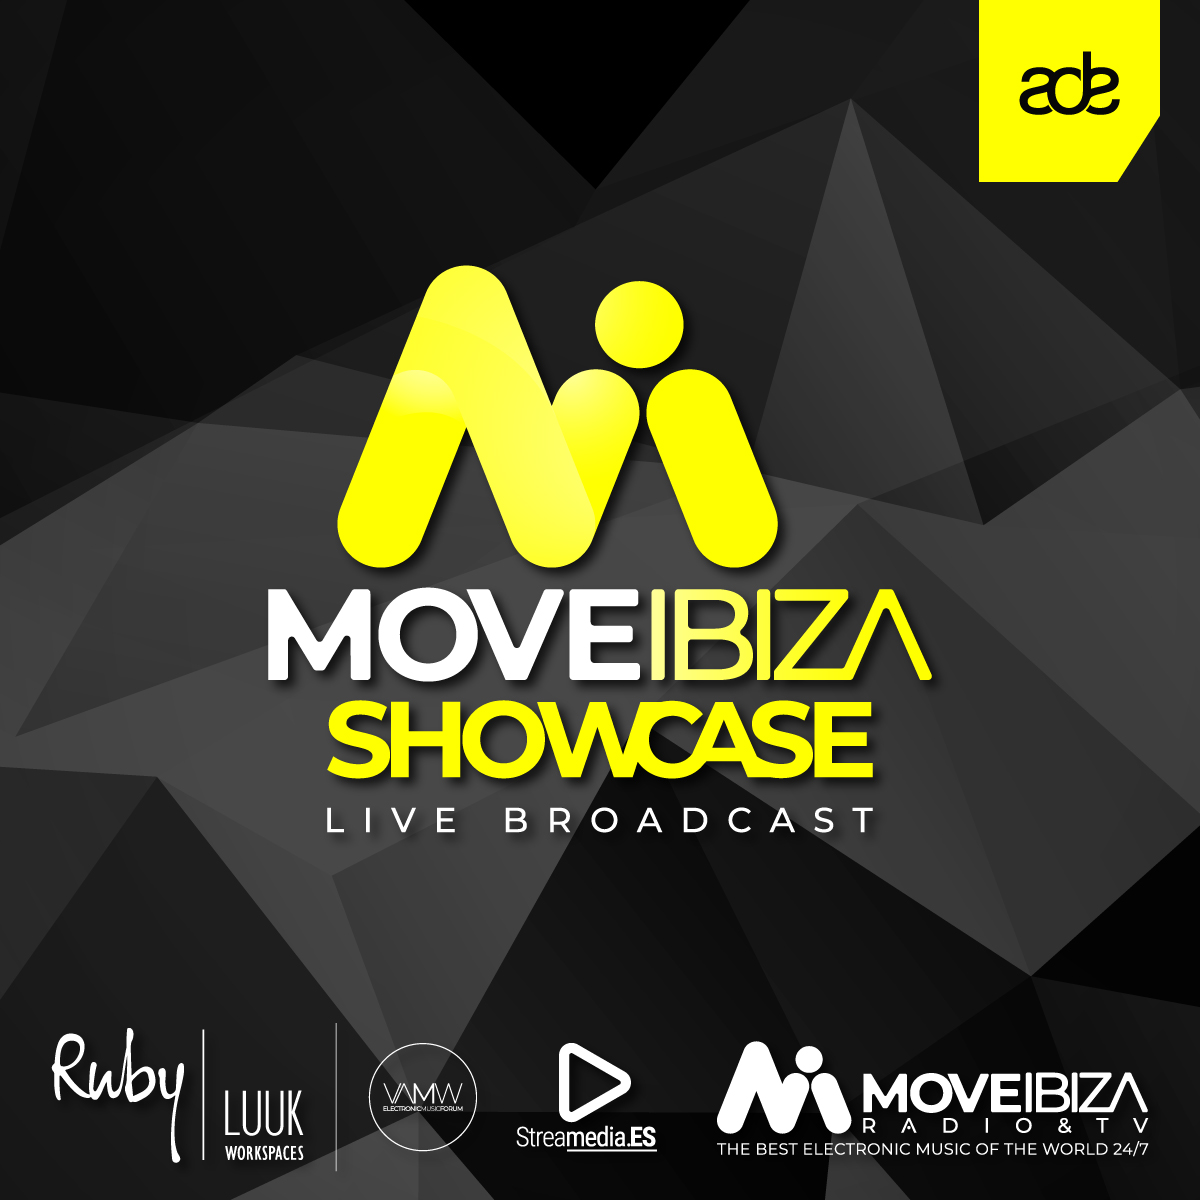 Move Ibiza Radio to Deliver an Unmissable Event at ADE 2023